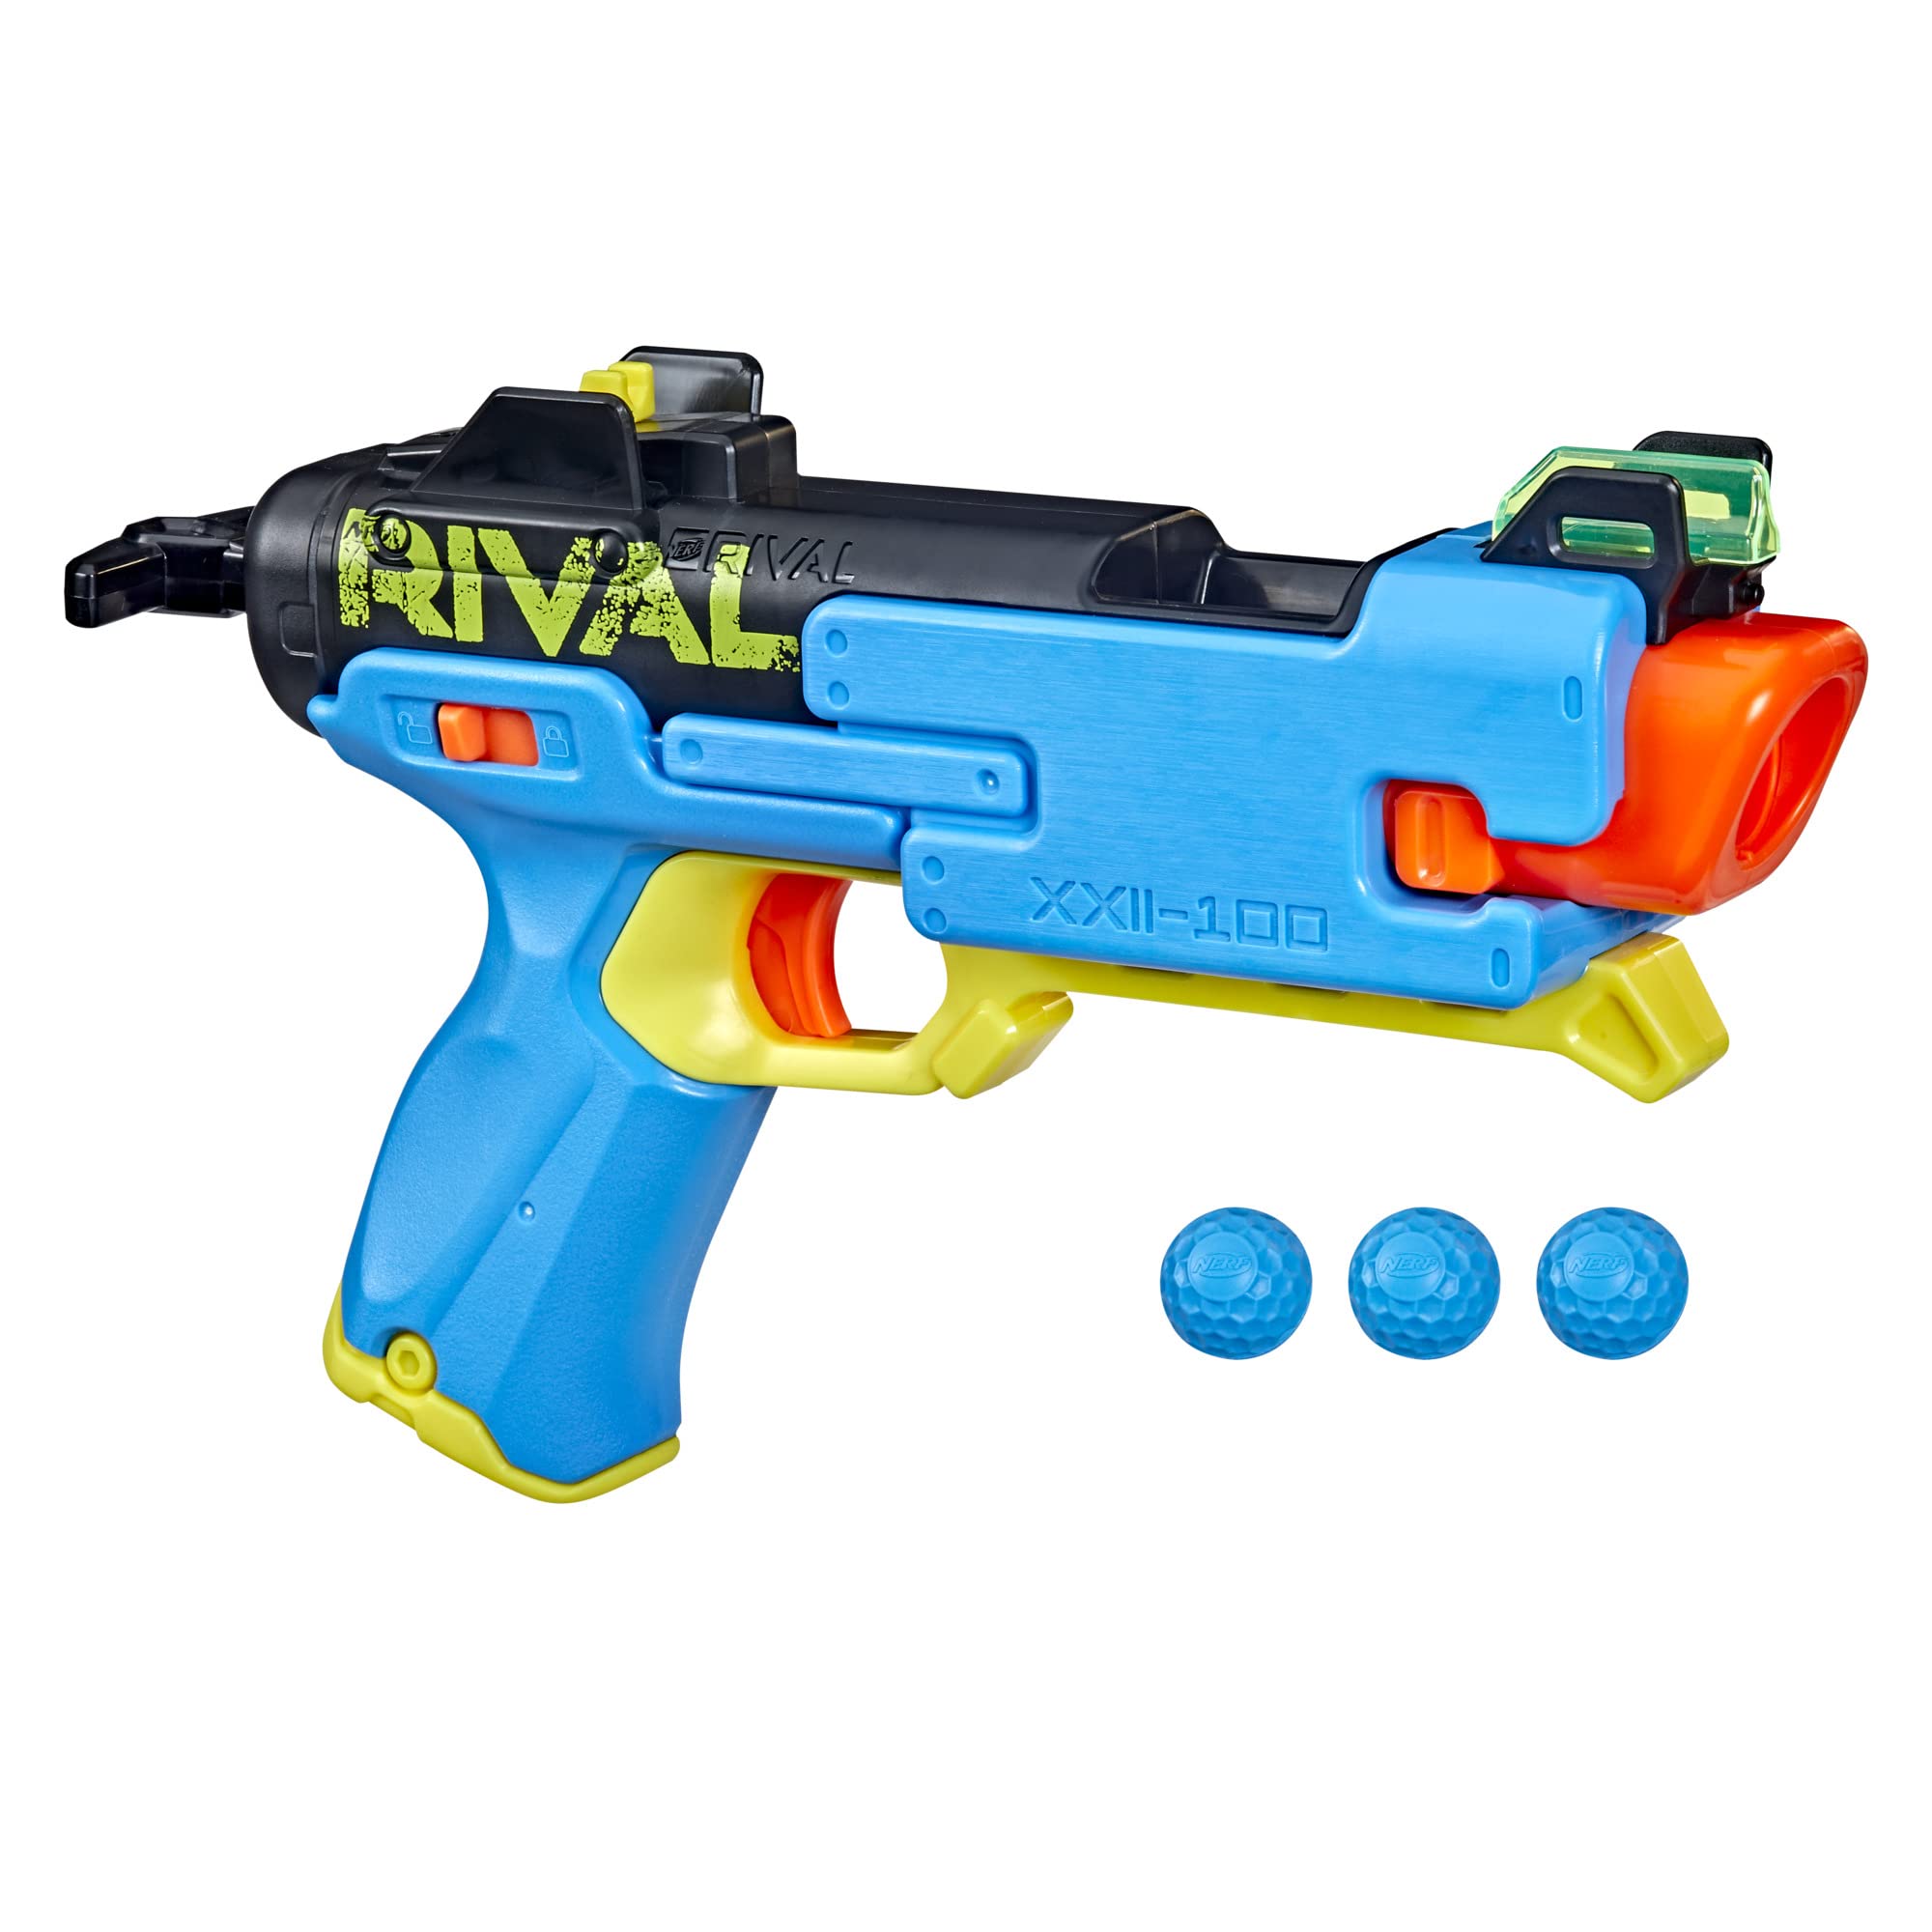 NERF Rival Fate XXII-100 Blaster w/ 3 Accu-Rounds $5 + Free Shipping w/ Prime or on $25+